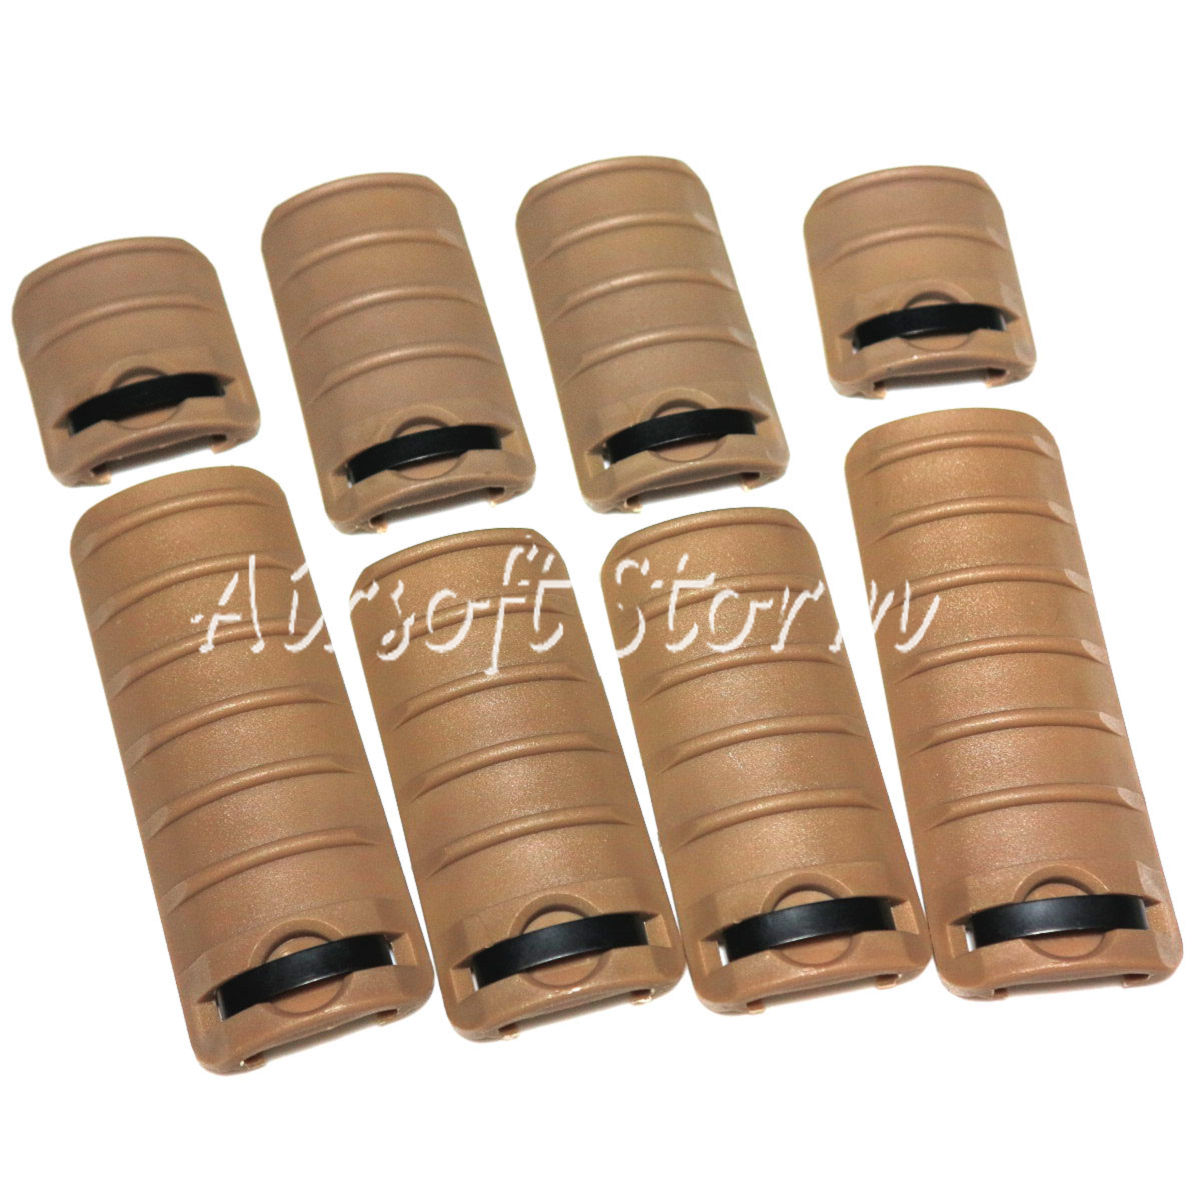 Shooting Tactical Gear 8pcs Set ENERGY Knight's Type 2/4/5/6 Ribs Rail Cover Panel Desert Tan - Click Image to Close